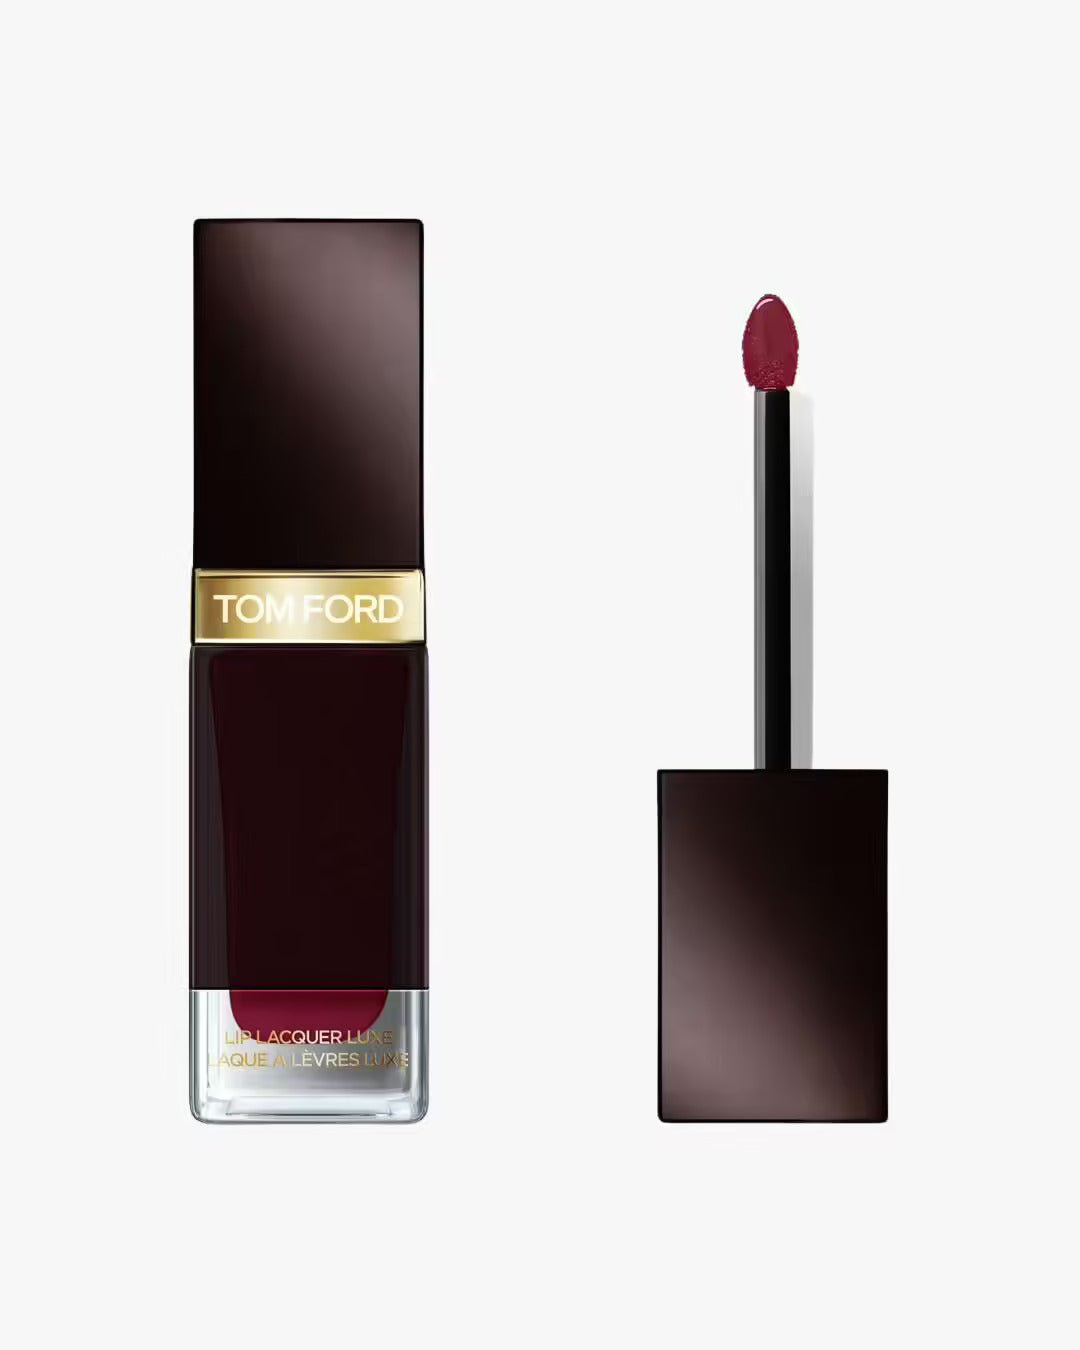 Tom Ford Lip Lacquer Luxe - 10 Infuriate Vinyl 6Ml - AllurebeautypkTom Ford Lip Lacquer Luxe - 10 Infuriate Vinyl 6Ml